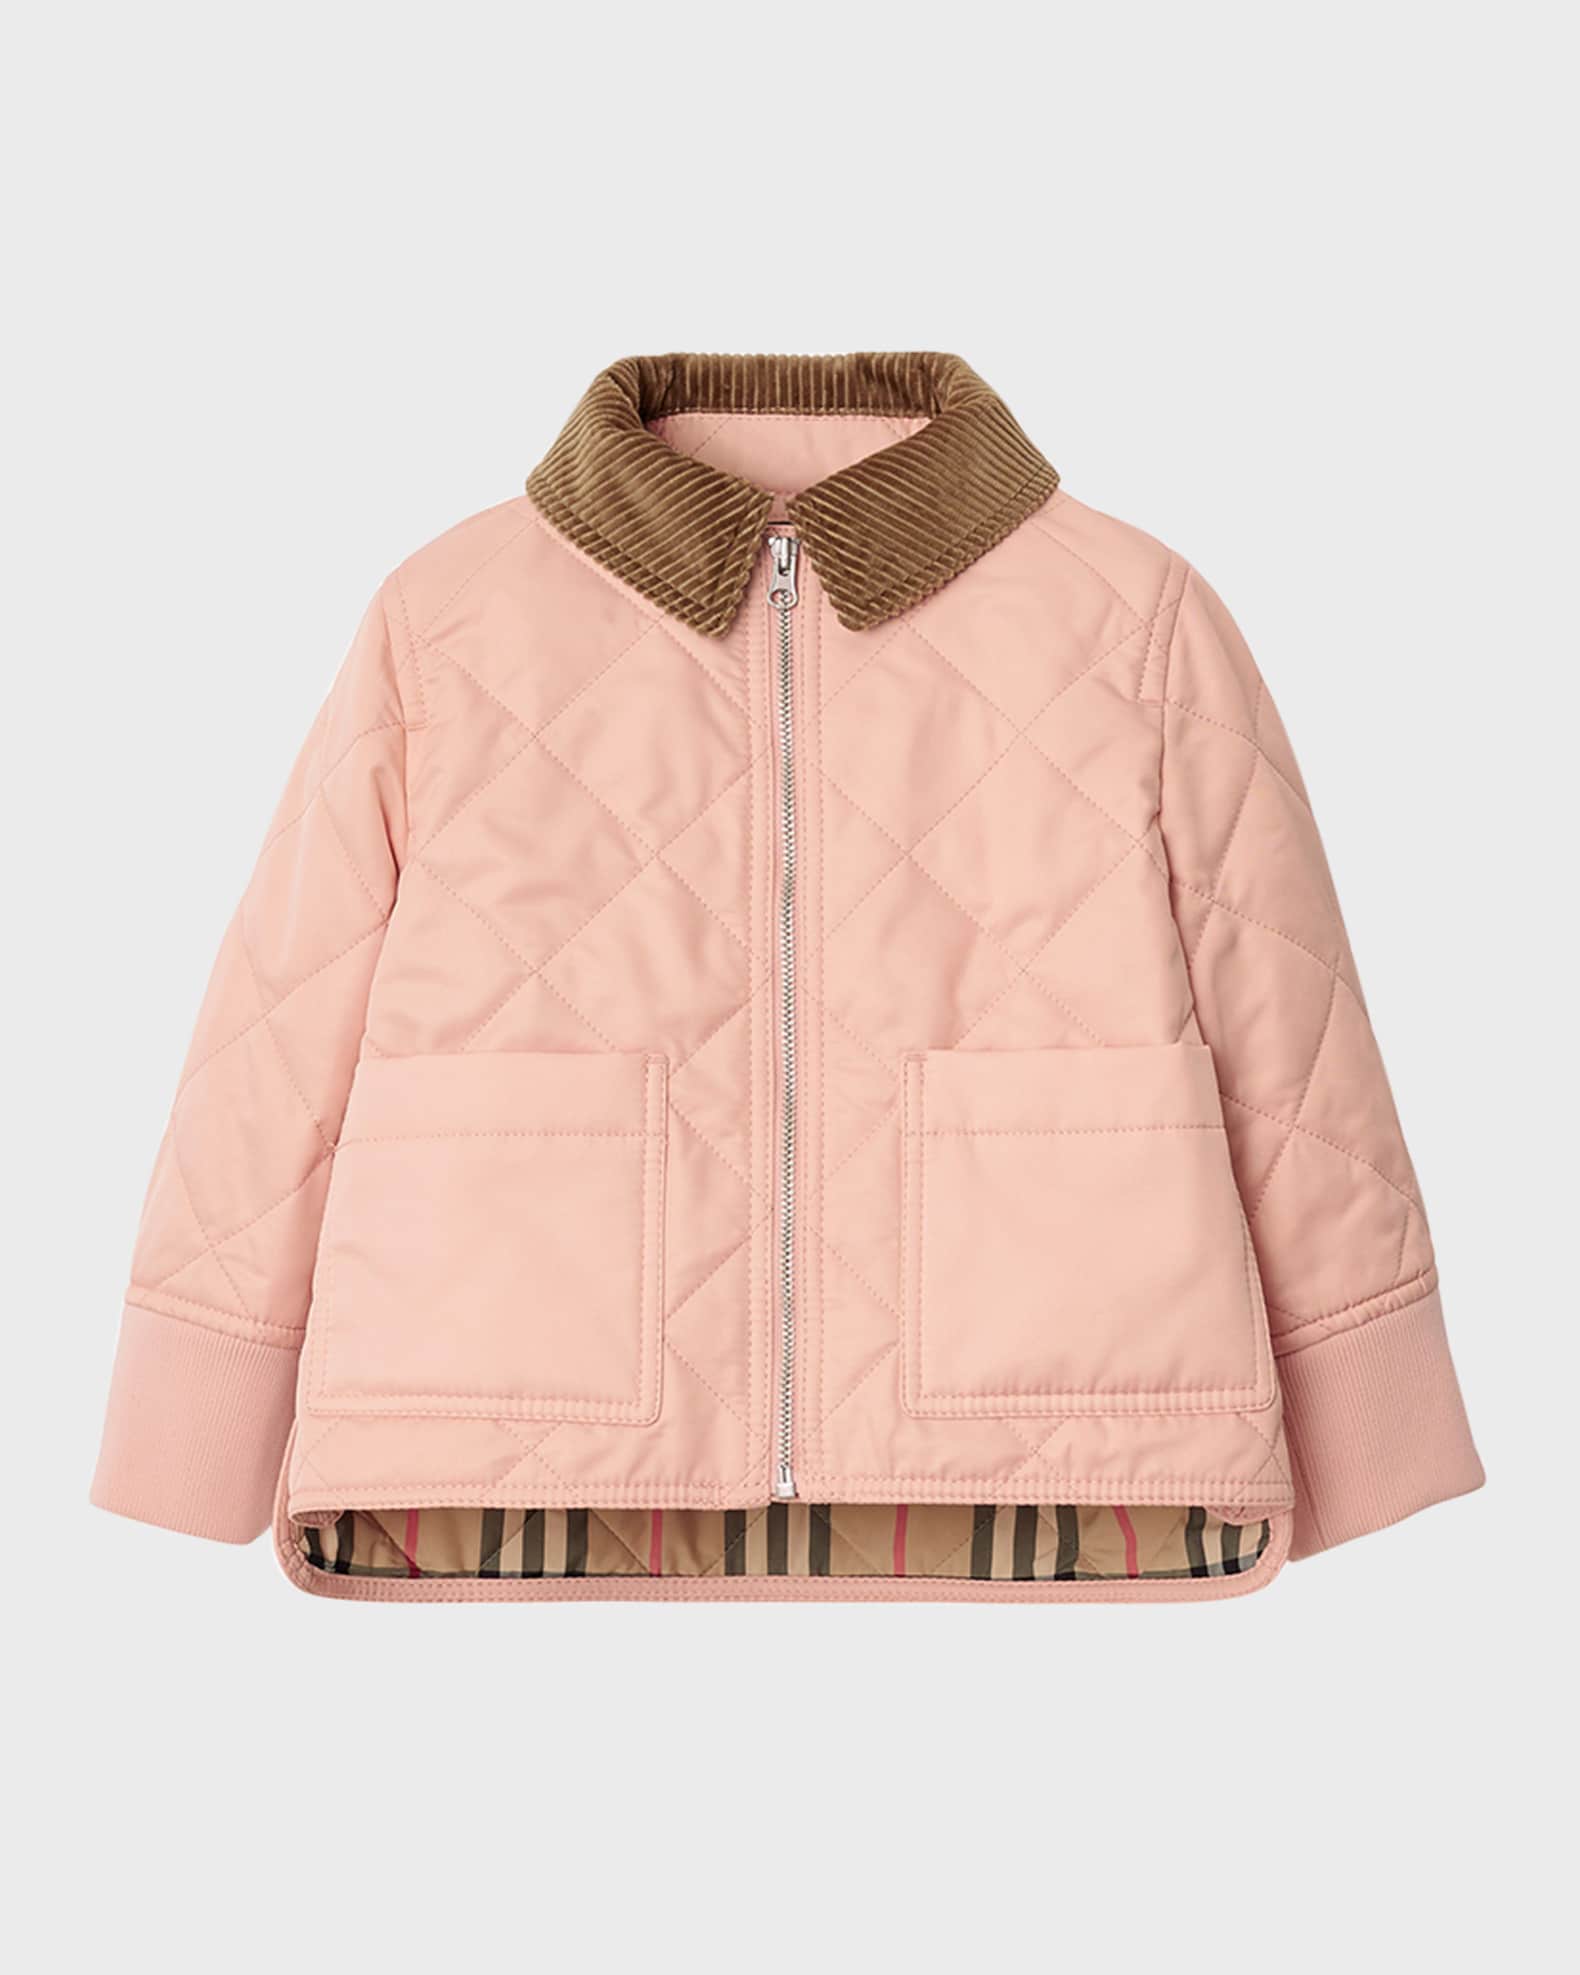 Burberry Girl's Otis Corduroy-Collar Quilted Jacket, Size 18M-2 ...